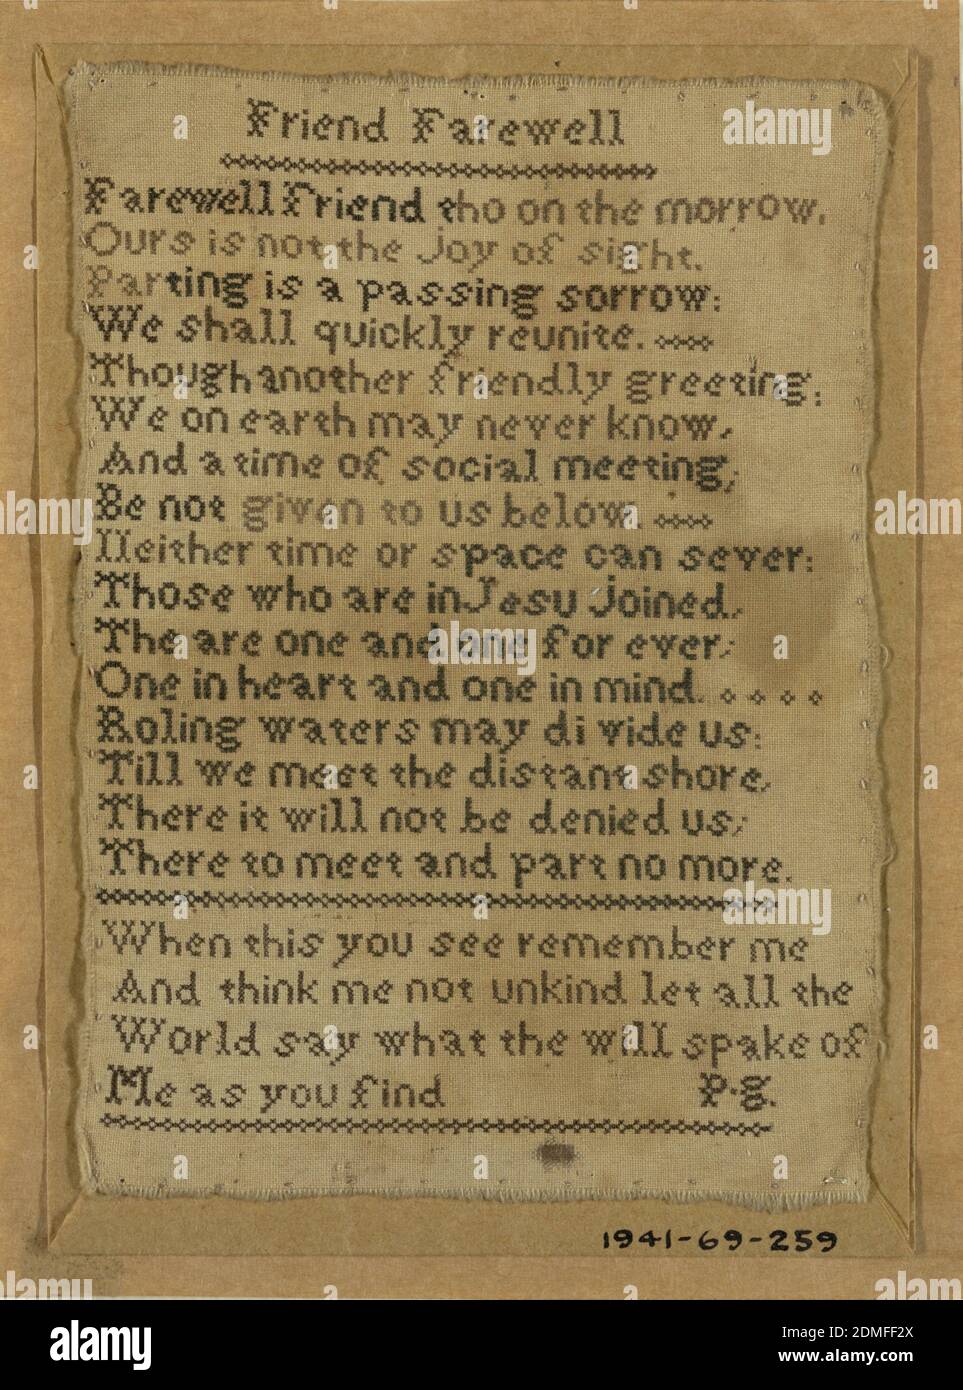 Sampler, Medium: silk embroidery, linen foundation Technique: cross stitch on plain weave, Two verses, one entitled 'Friend Farewell,' and the initials 'P.G.' Worked in cross stitch., England, early 19th century, embroidery & stitching, Sampler Stock Photo